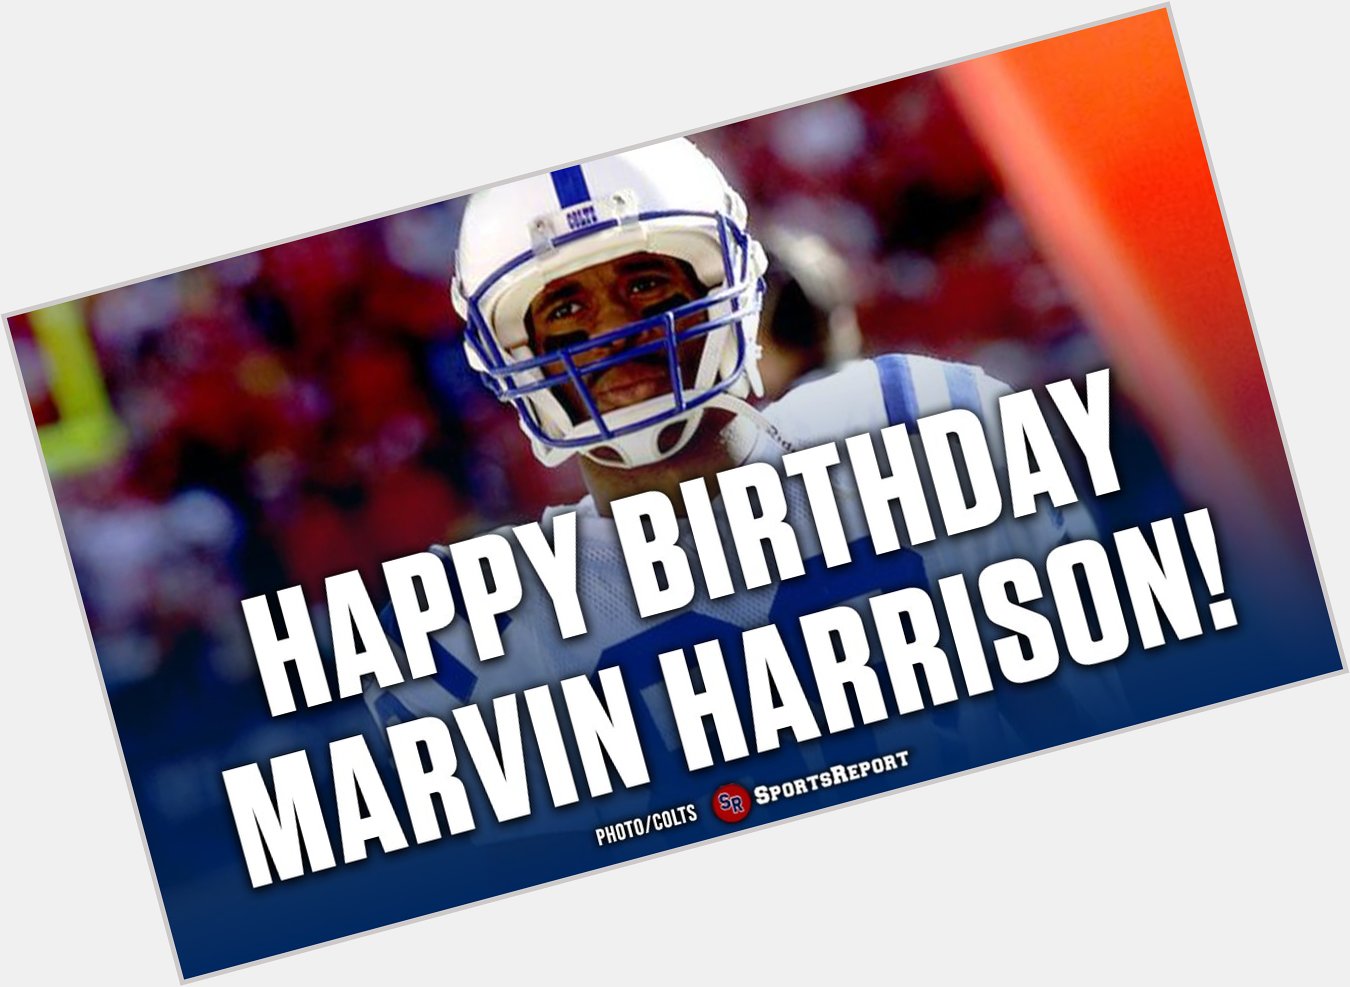  Fans, let\s wish legend Marvin Harrison a Happy Birthday! GO COLTS!! 